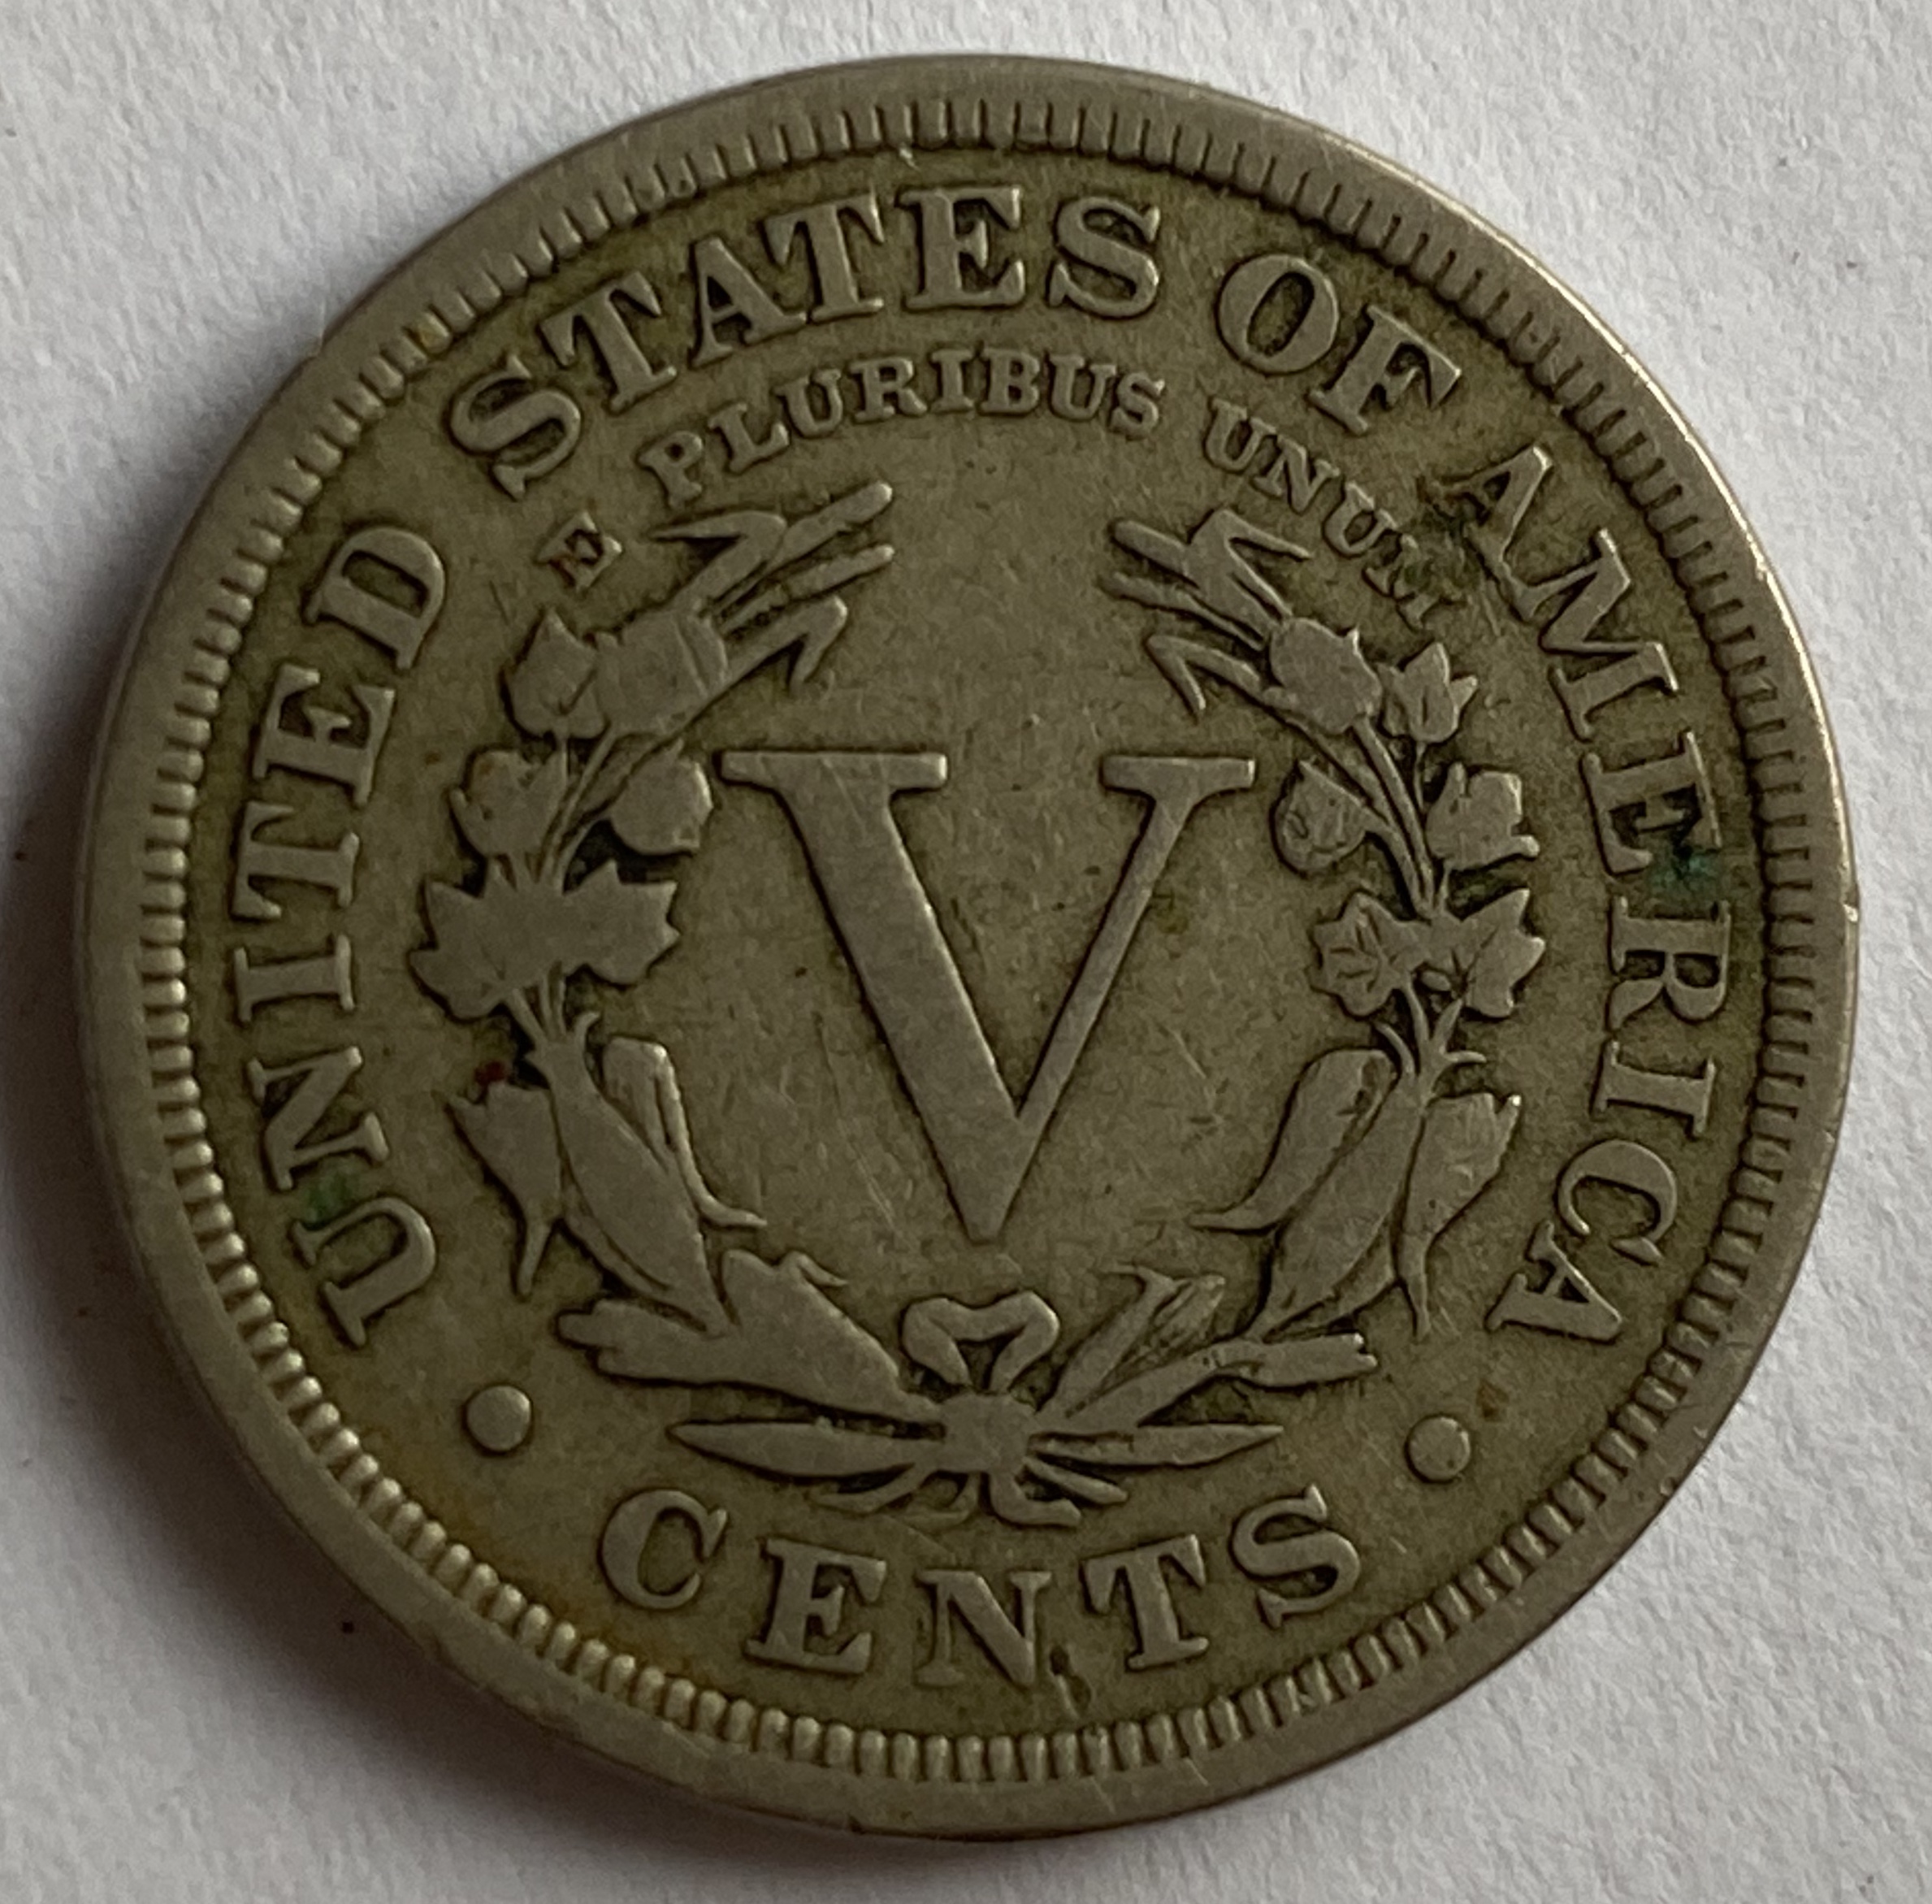 old coin values